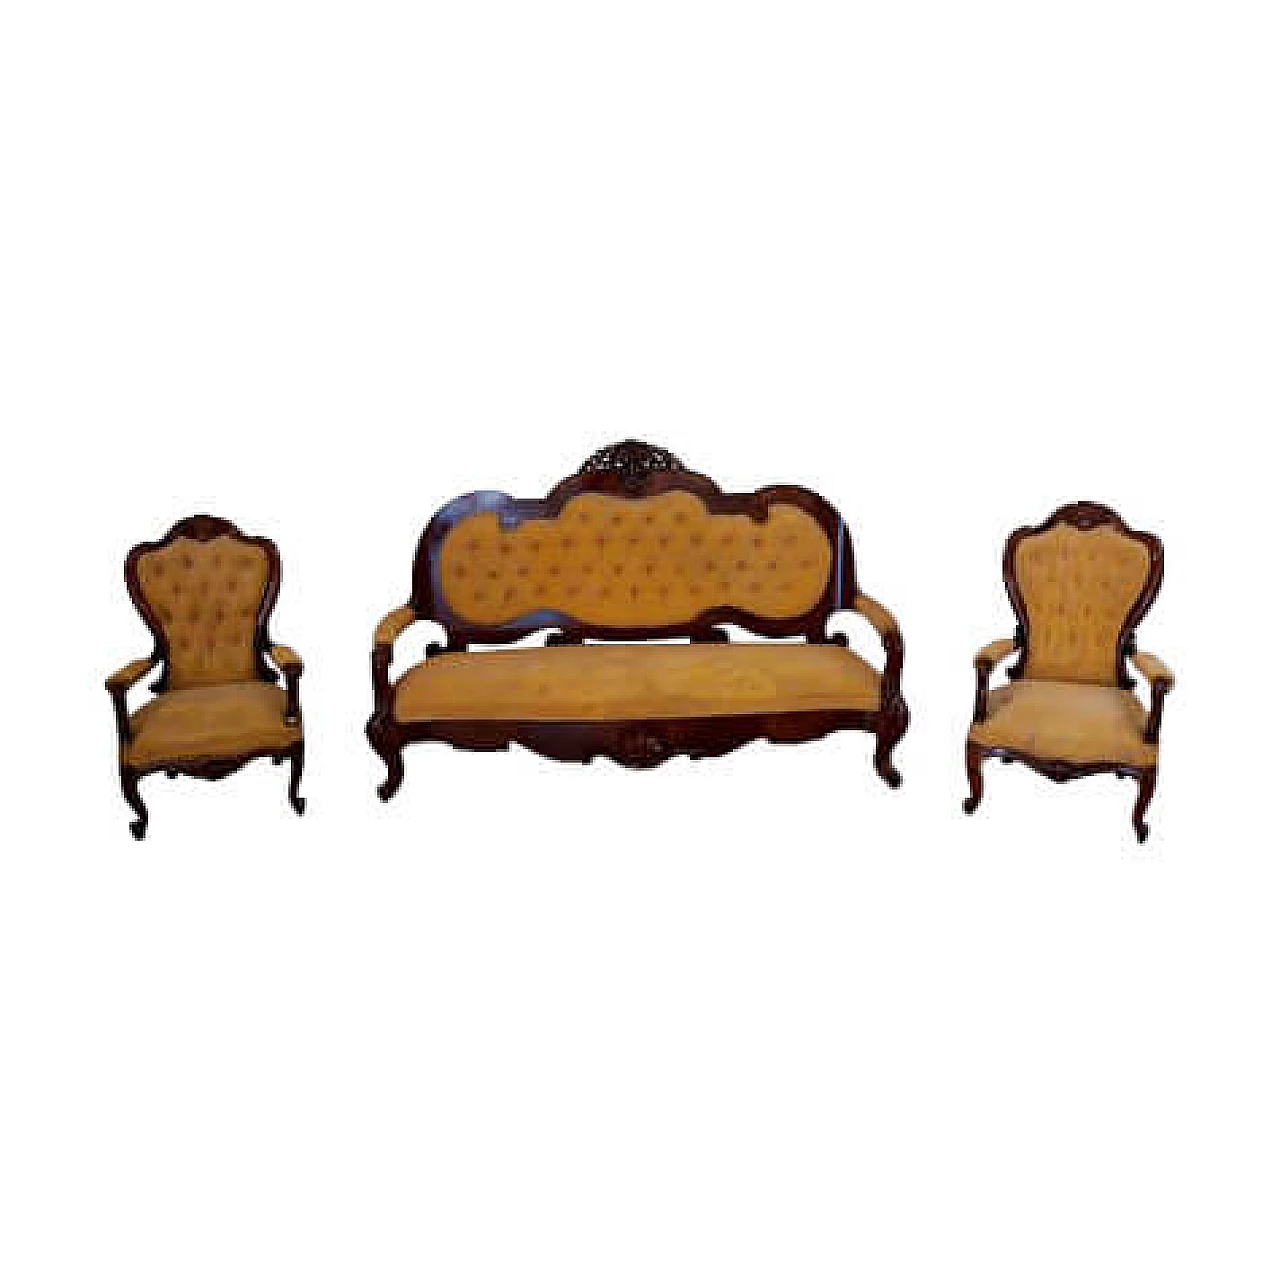 Sofa with pair of armchairs by Luise Philippe, '800 1143381